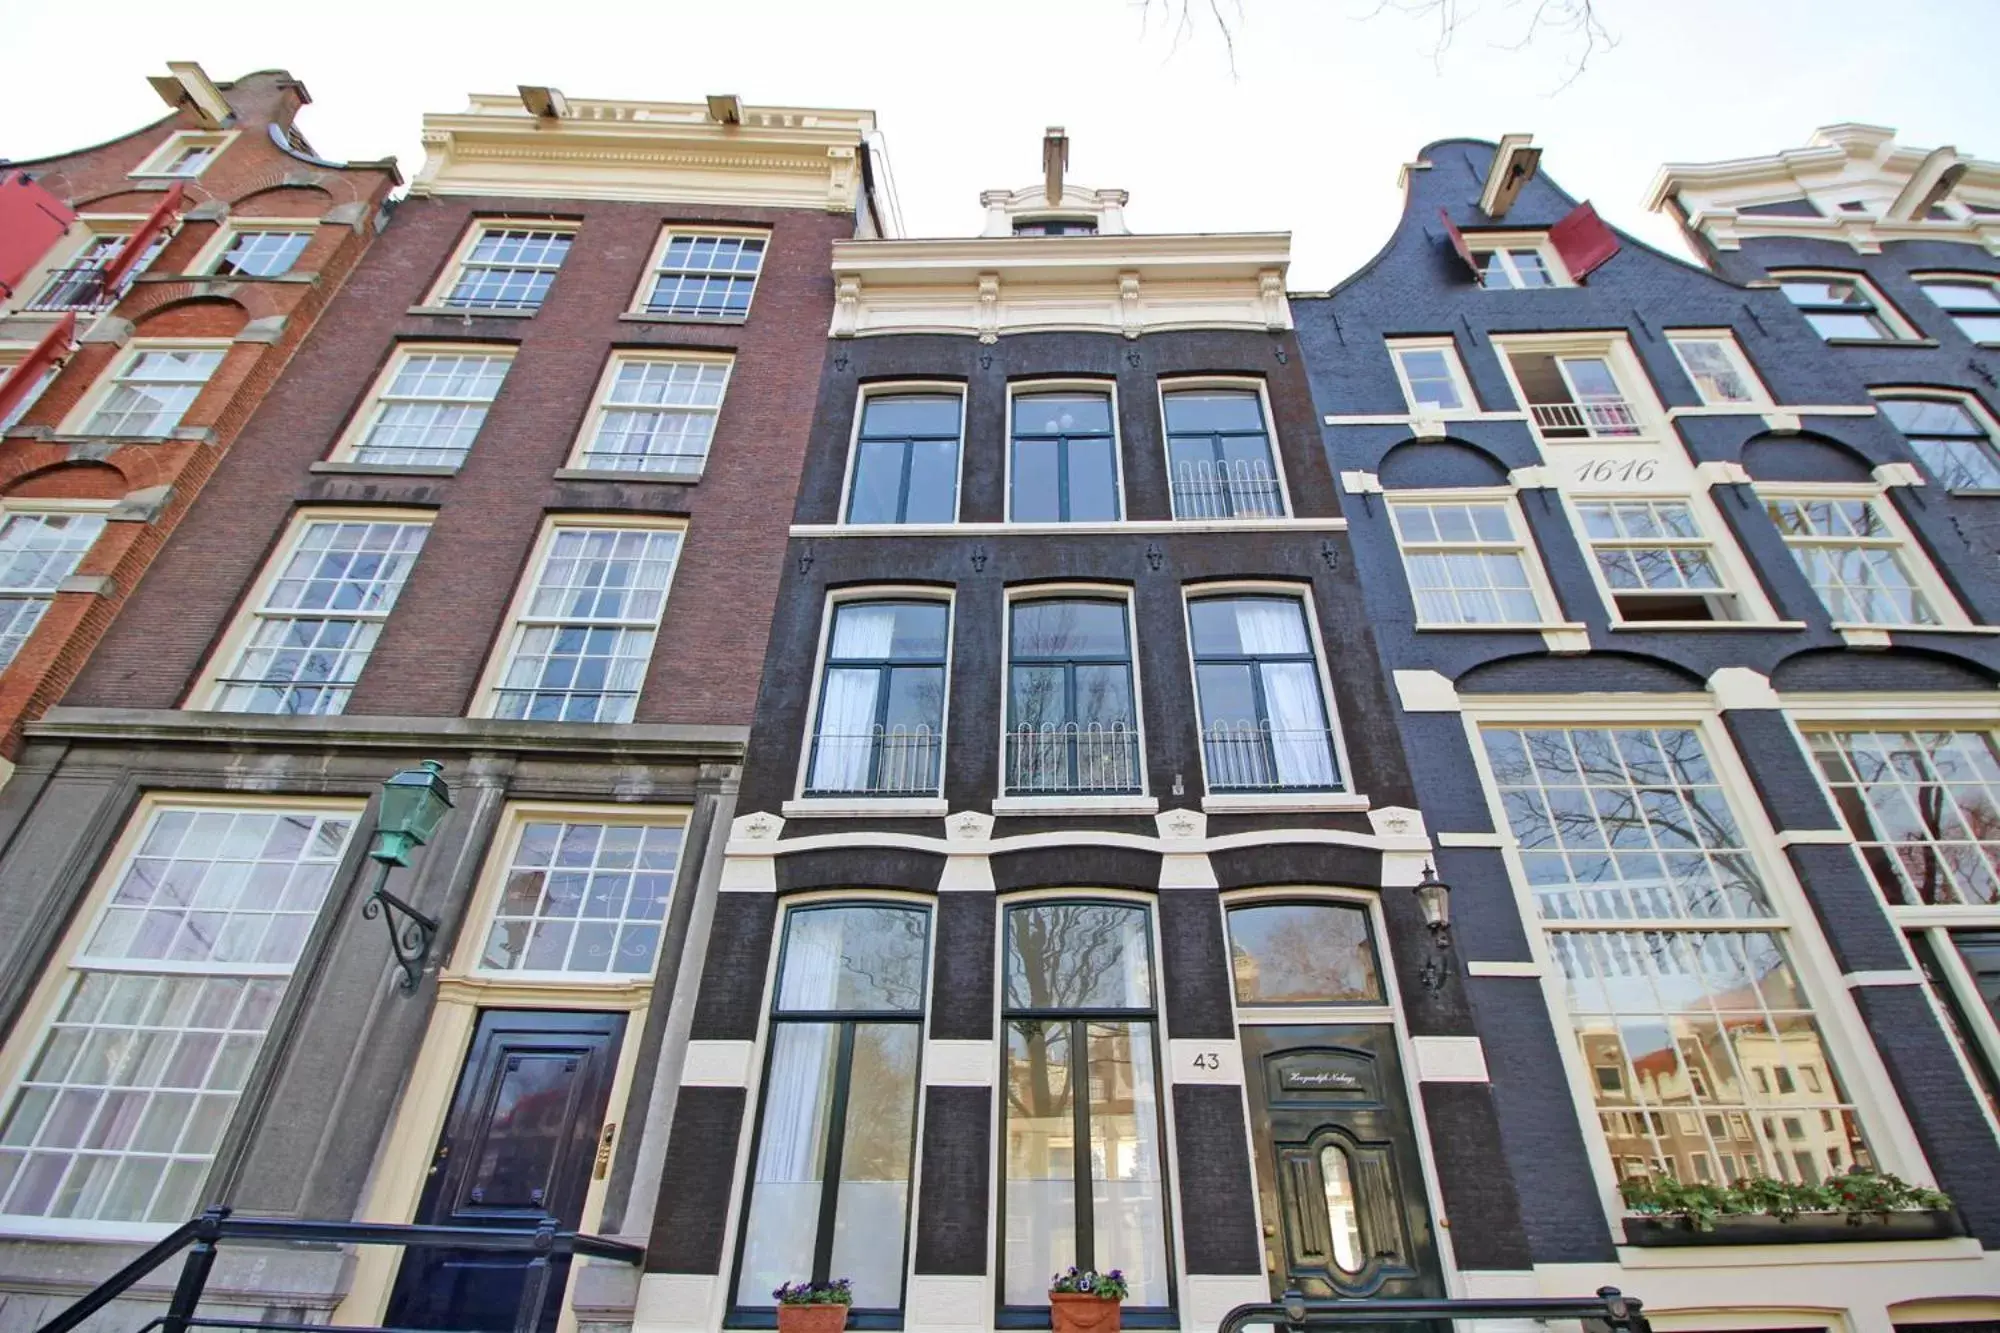 Property Building in Cozy Jordaan canalhouse near Anne Frank House